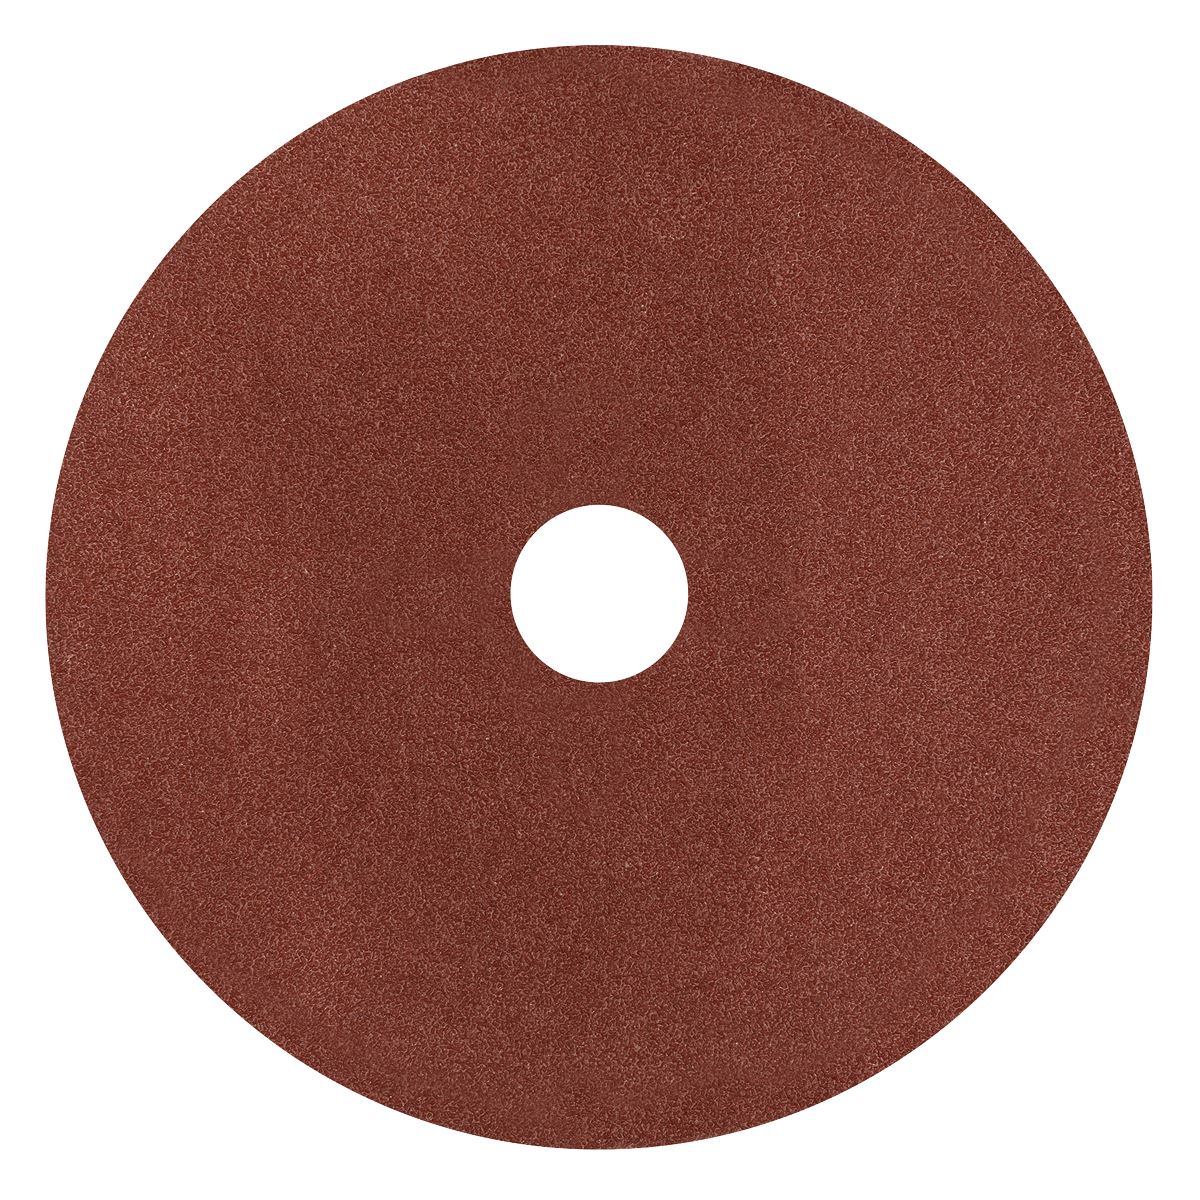 Worksafe by Sealey Fibre Backed Disc Ø100mm - 60Grit Pack of 25